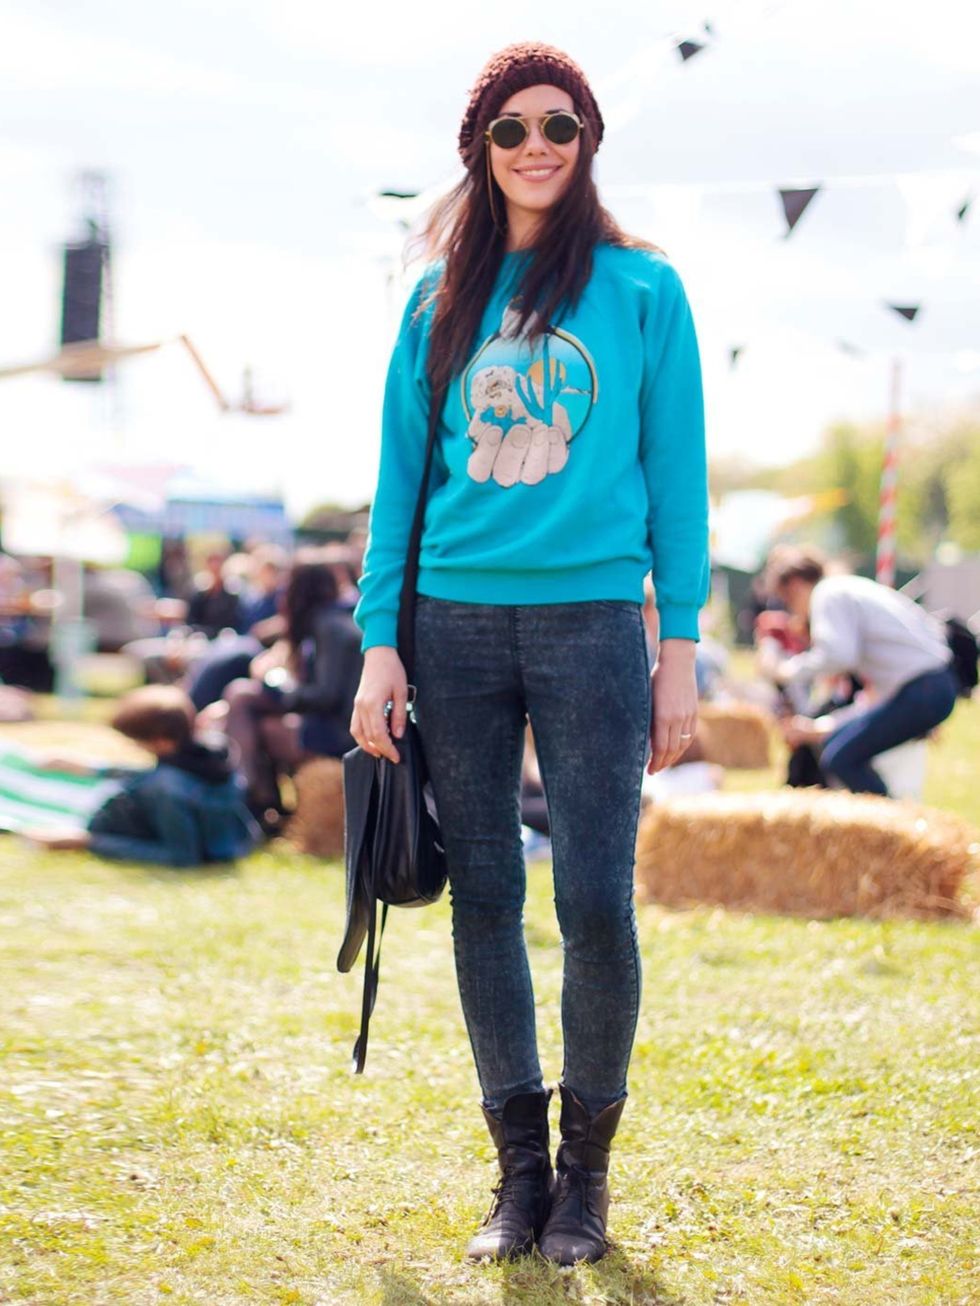 <p>Jessica Raynolds-Monk, 29, wears Matalan trousers. All other pieces, vintage.</p><p><a href="http://www.elleuk.com/travel/holiday-inspiration/the-elle-guide-to-festivals-2013">ELLE's essential 2013 festival guide</a></p><p><a href="http://www.elleuk.co